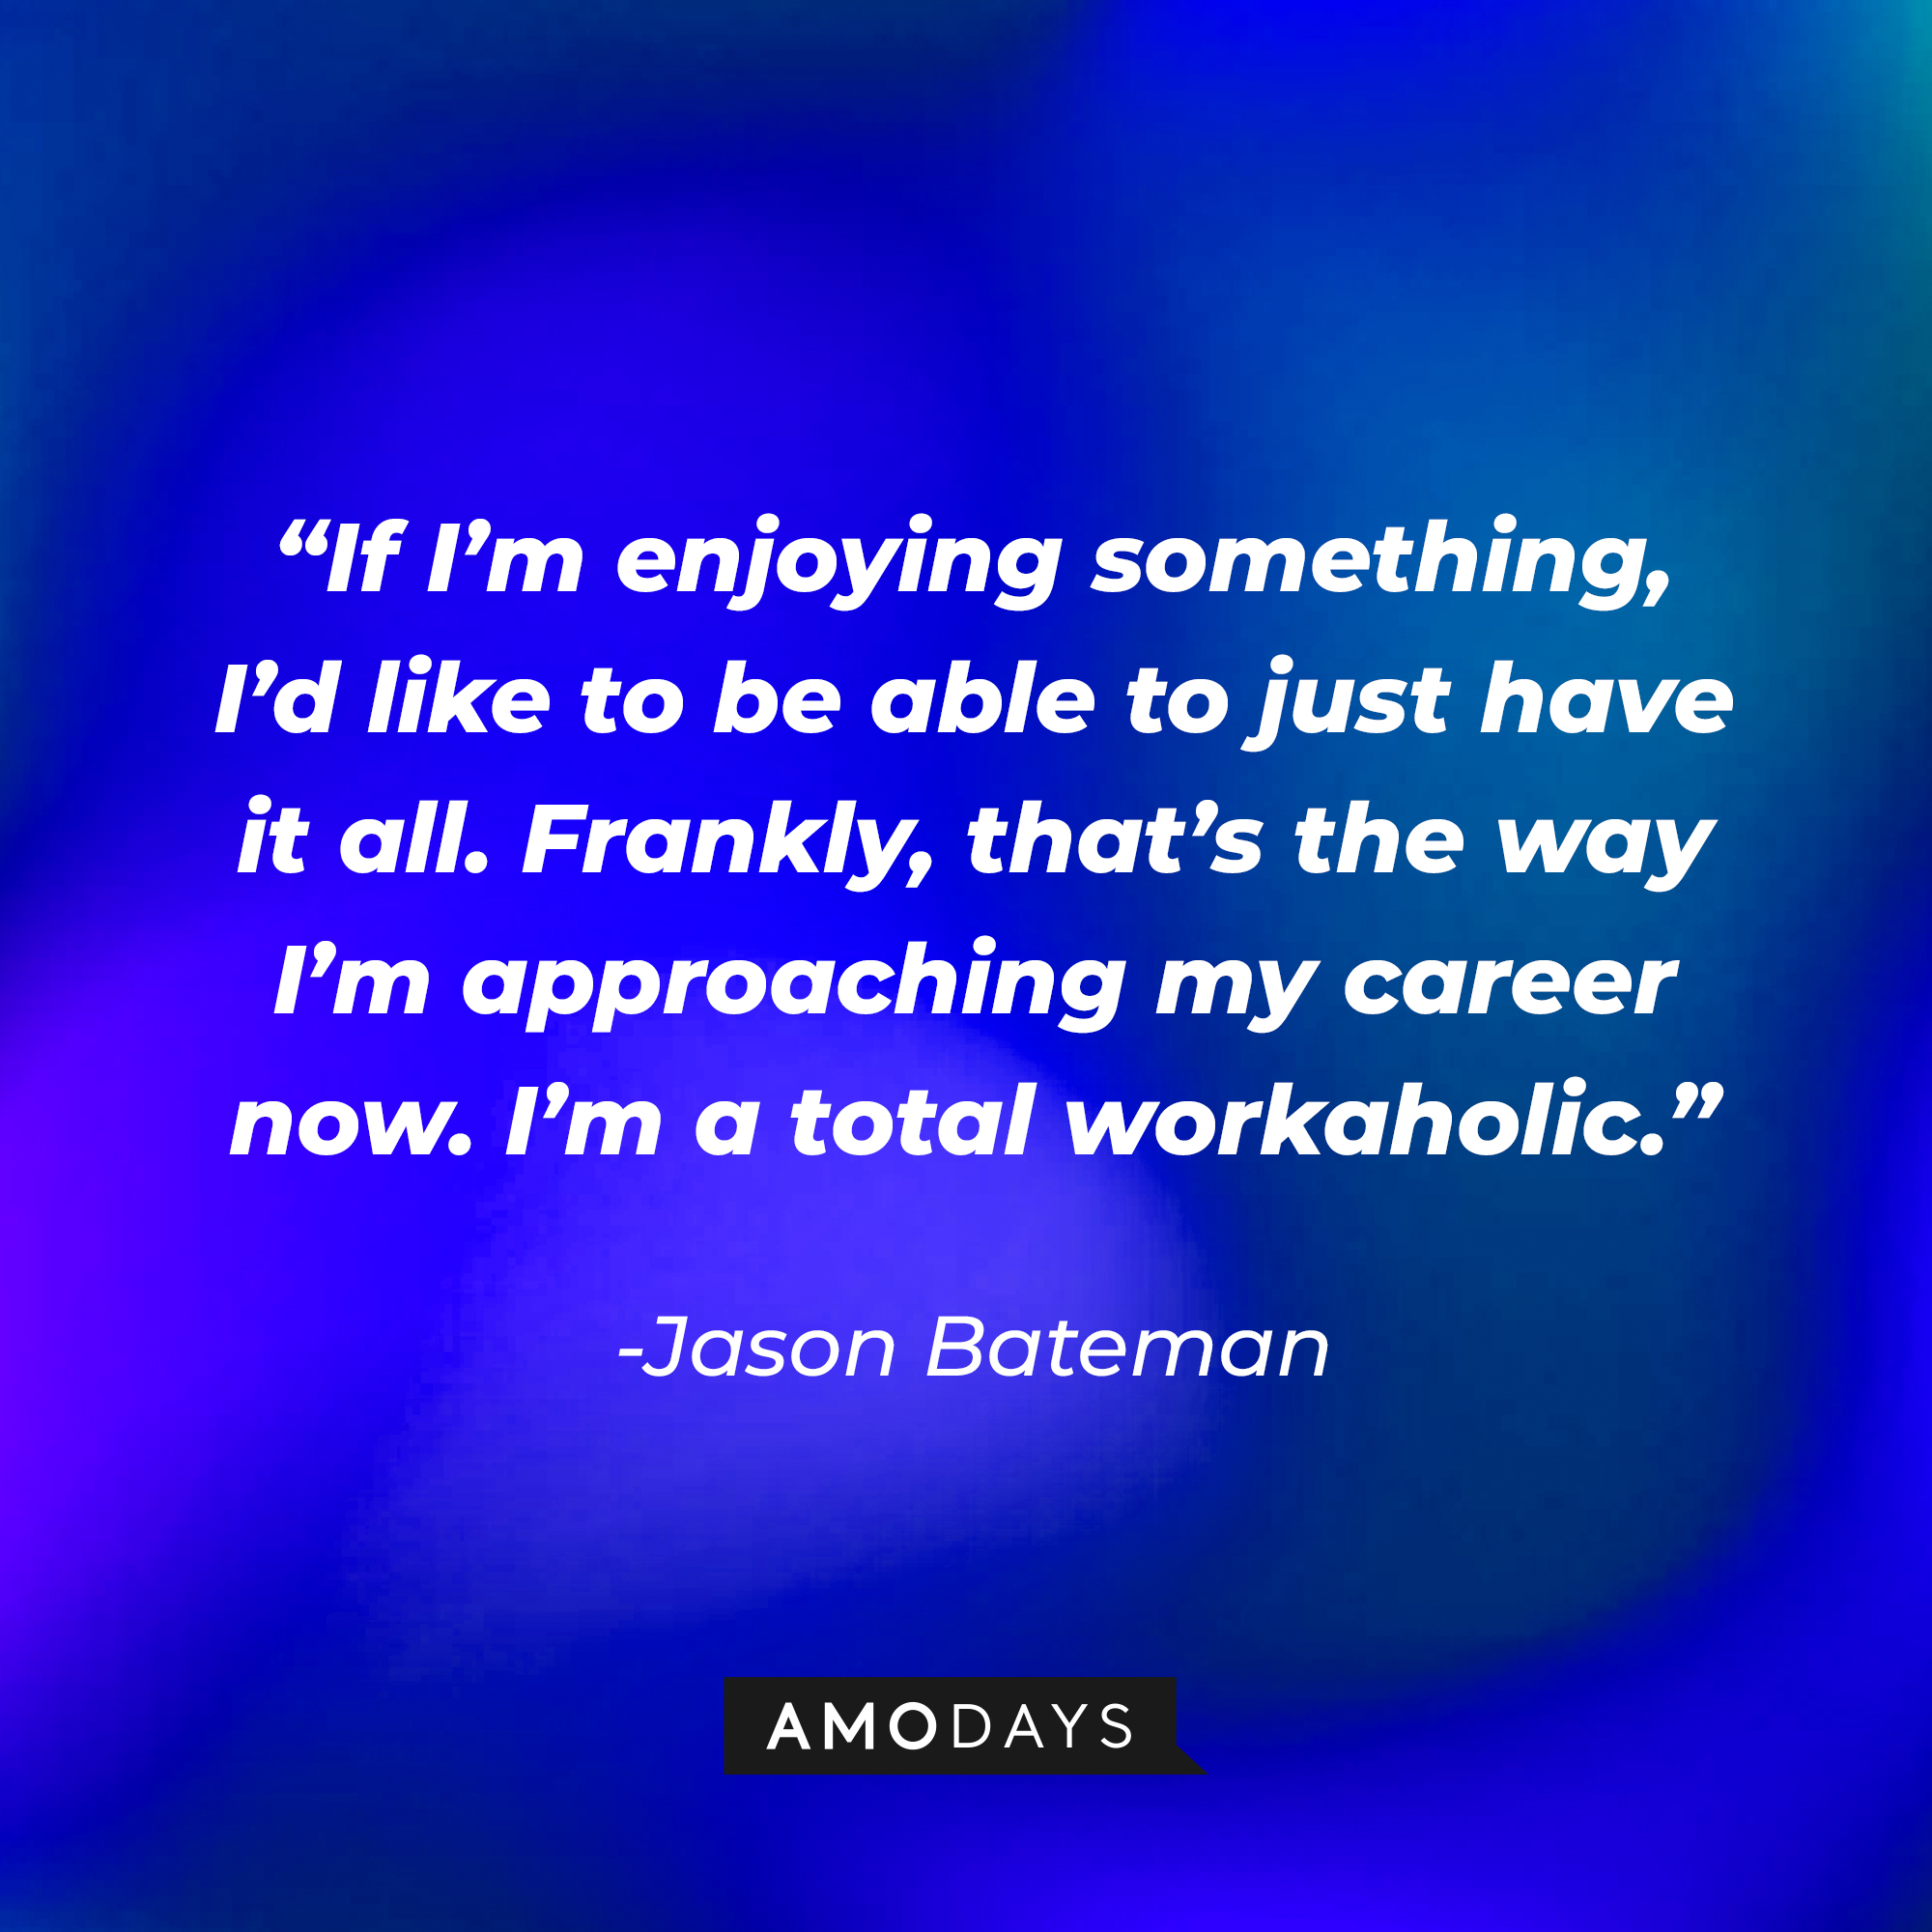 Jason Bateman's quote: “If I’m enjoying something, I’d like to be able to just have it all. Frankly, that’s the way I’m approaching my career now. I’m a total workaholic.” | Source: Amodays